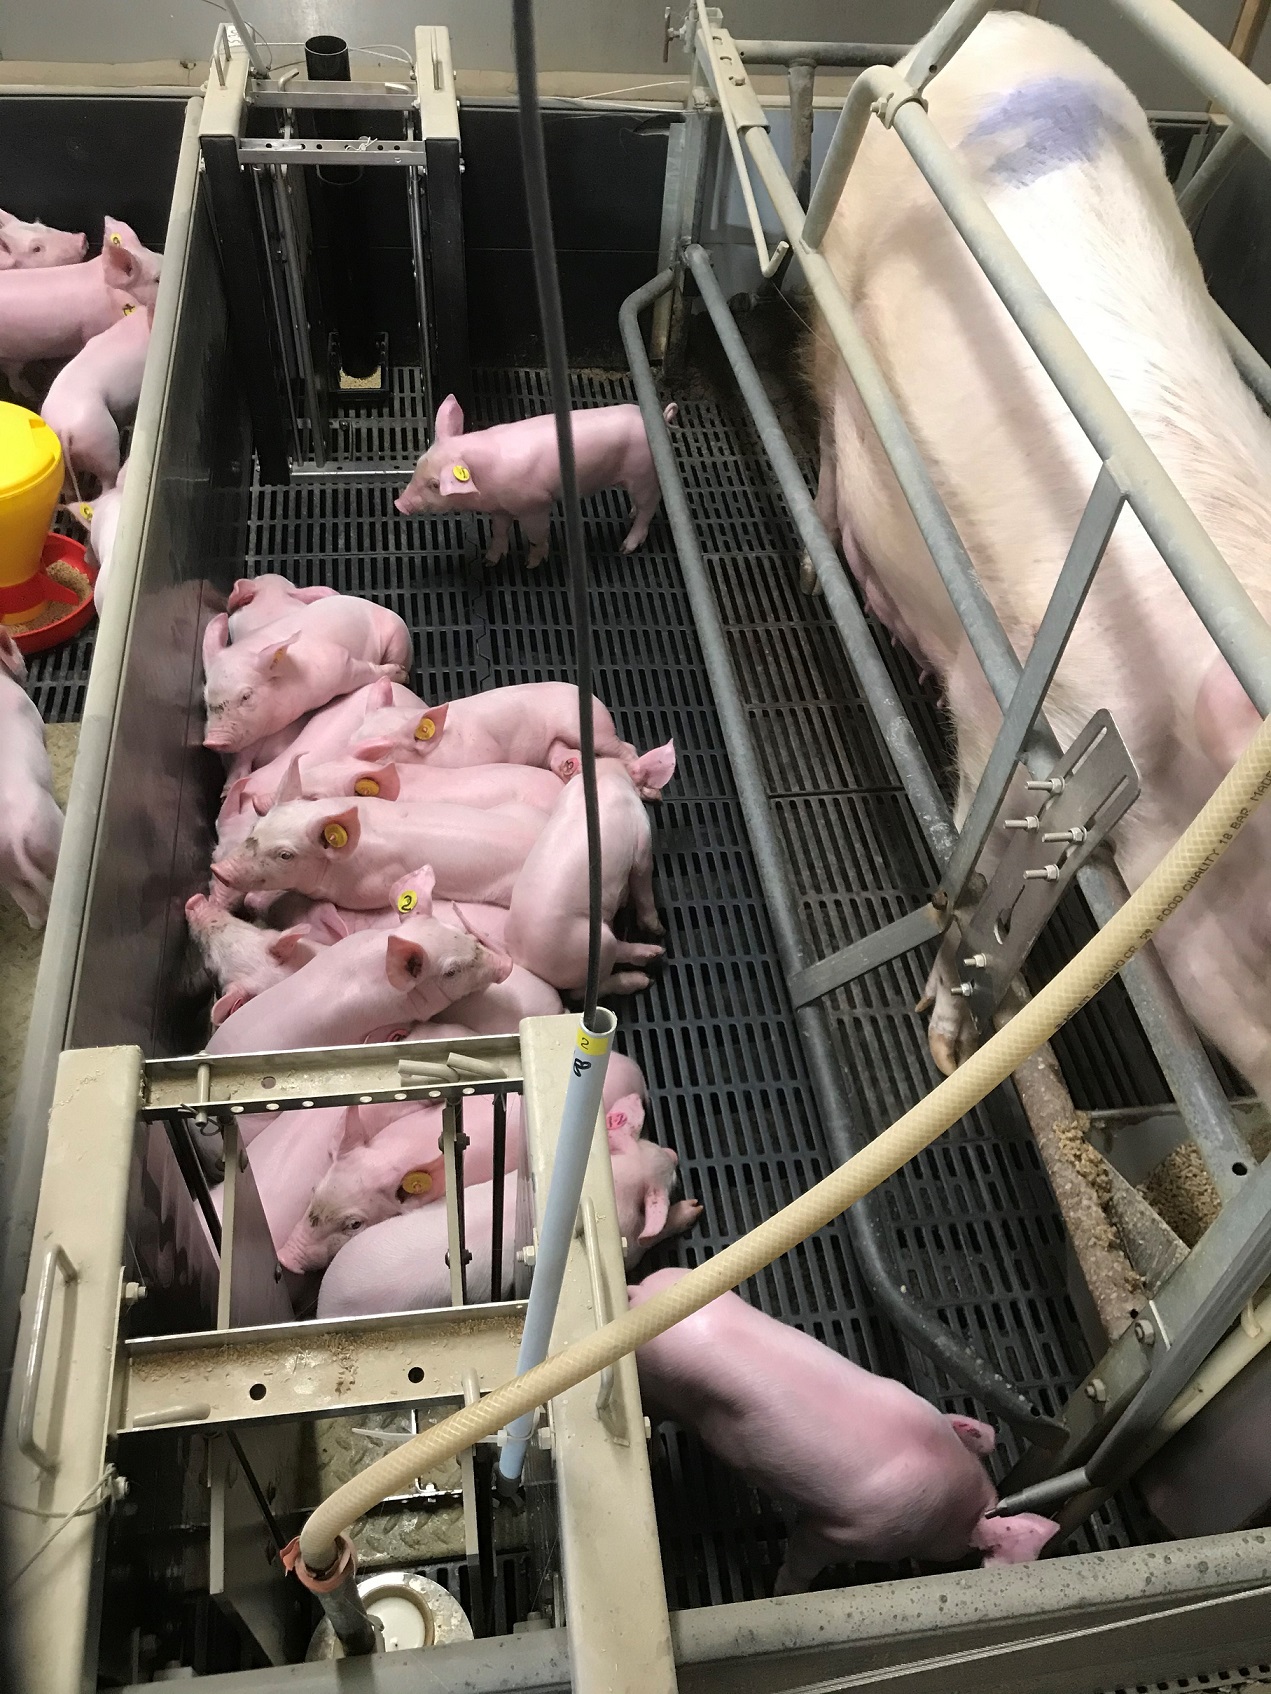 Pen of piglets next to a sow with access to supplementary milk